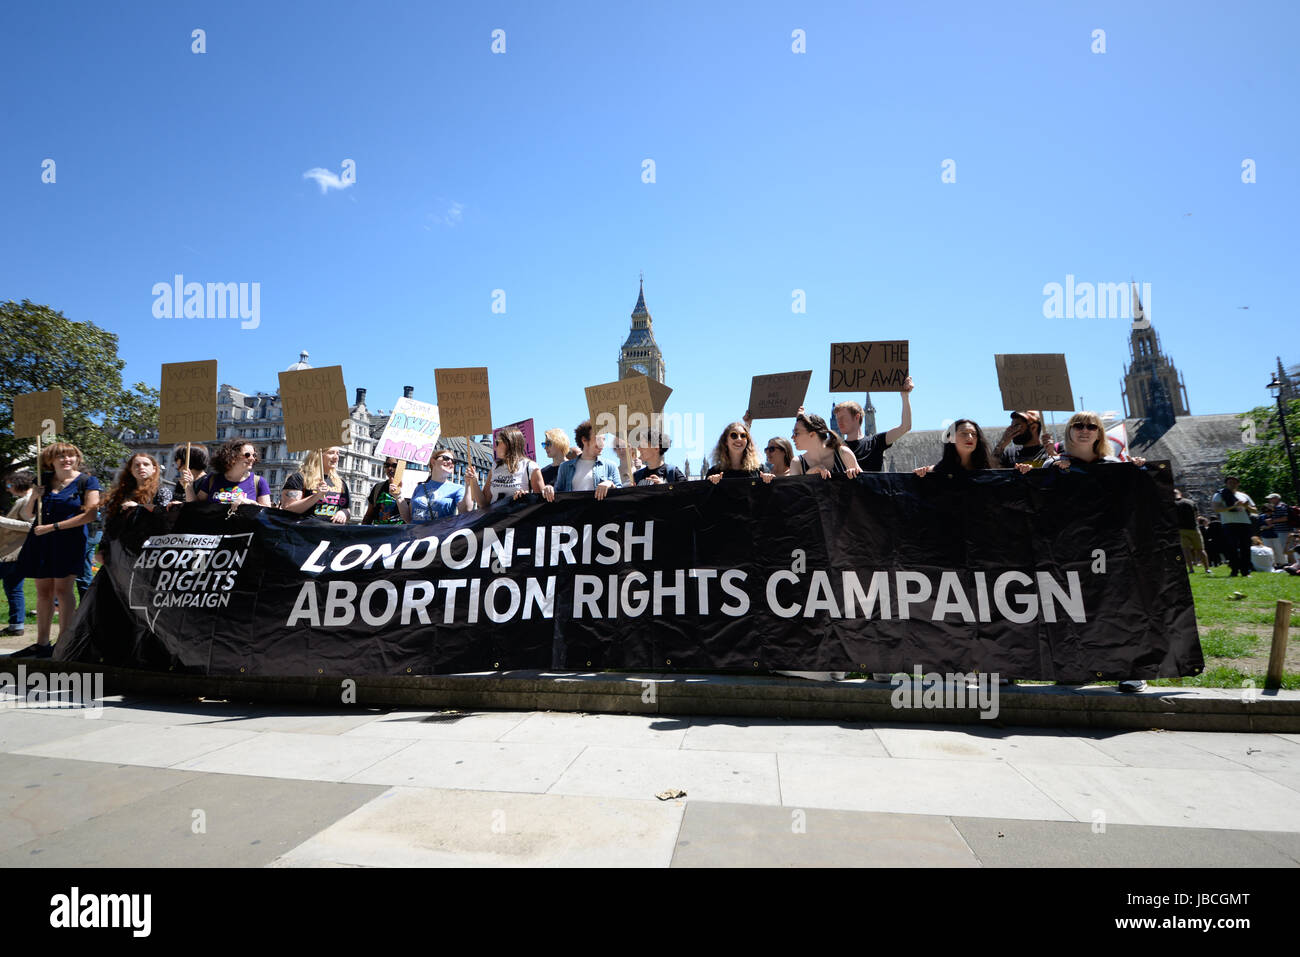 Protest. London Irish Abortion Rights Campaign banner against DUP alliance Stock Photo